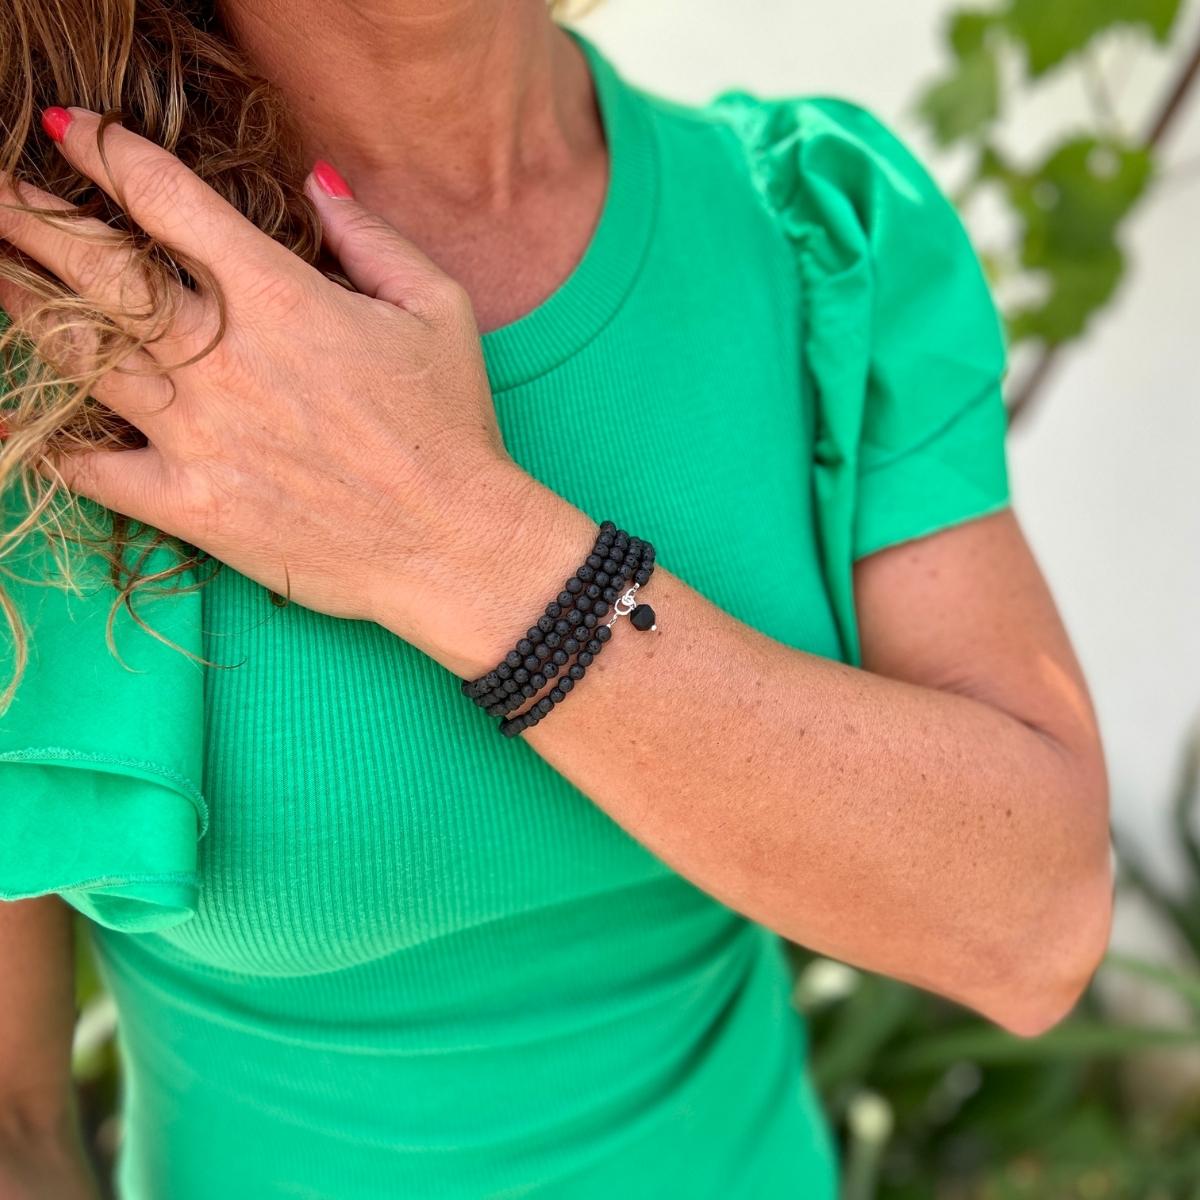 Whether you're looking to enhance your mindfulness practices, ground your energy, or make a statement with a unique piece of jewelry, the Lava Luxe Wrap Bracelet offers a luxurious and empowering option that embodies the harmonious balance of earth's elements.